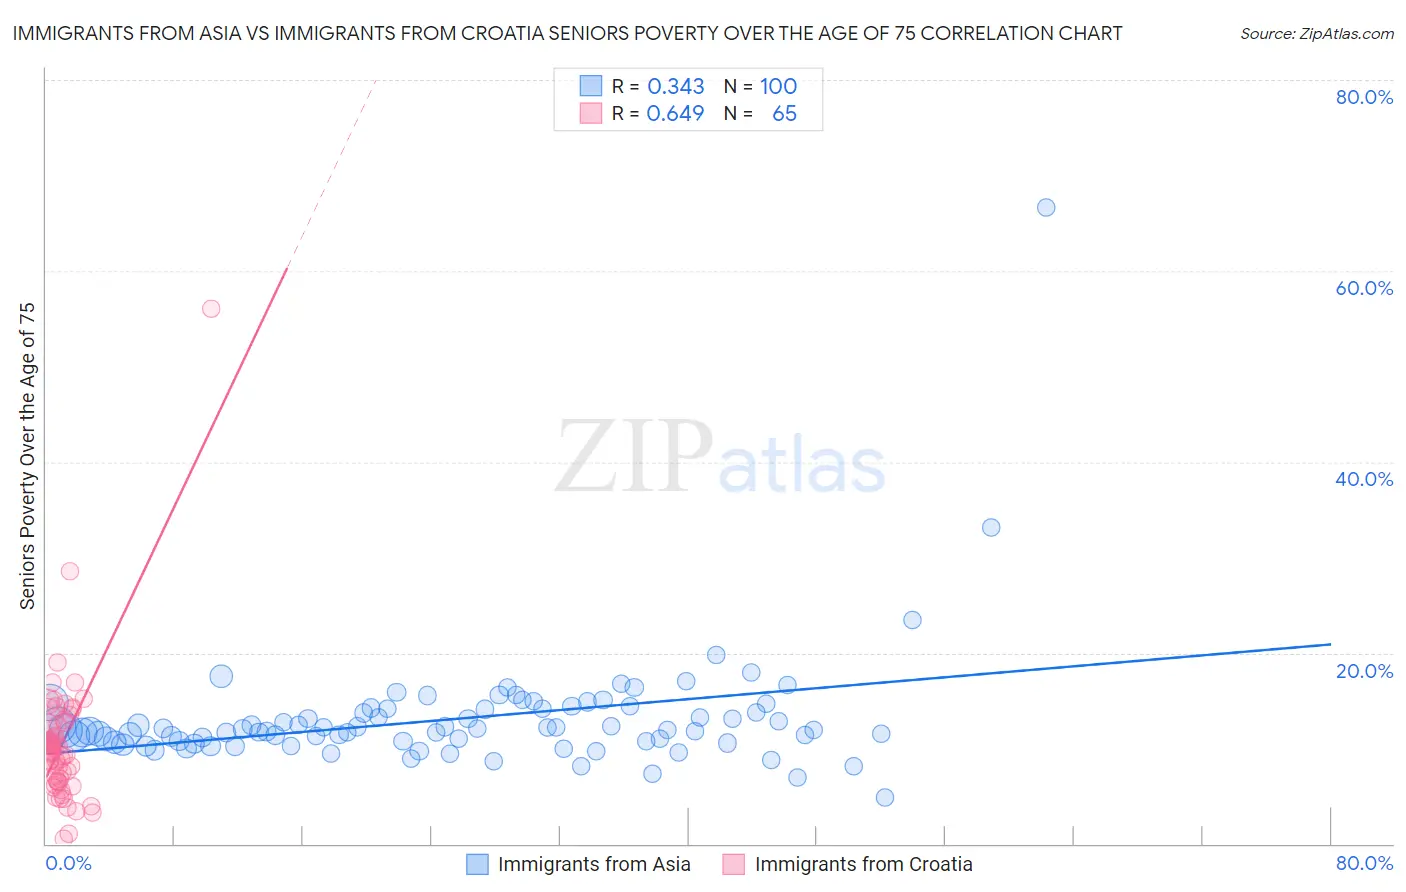 Immigrants from Asia vs Immigrants from Croatia Seniors Poverty Over the Age of 75